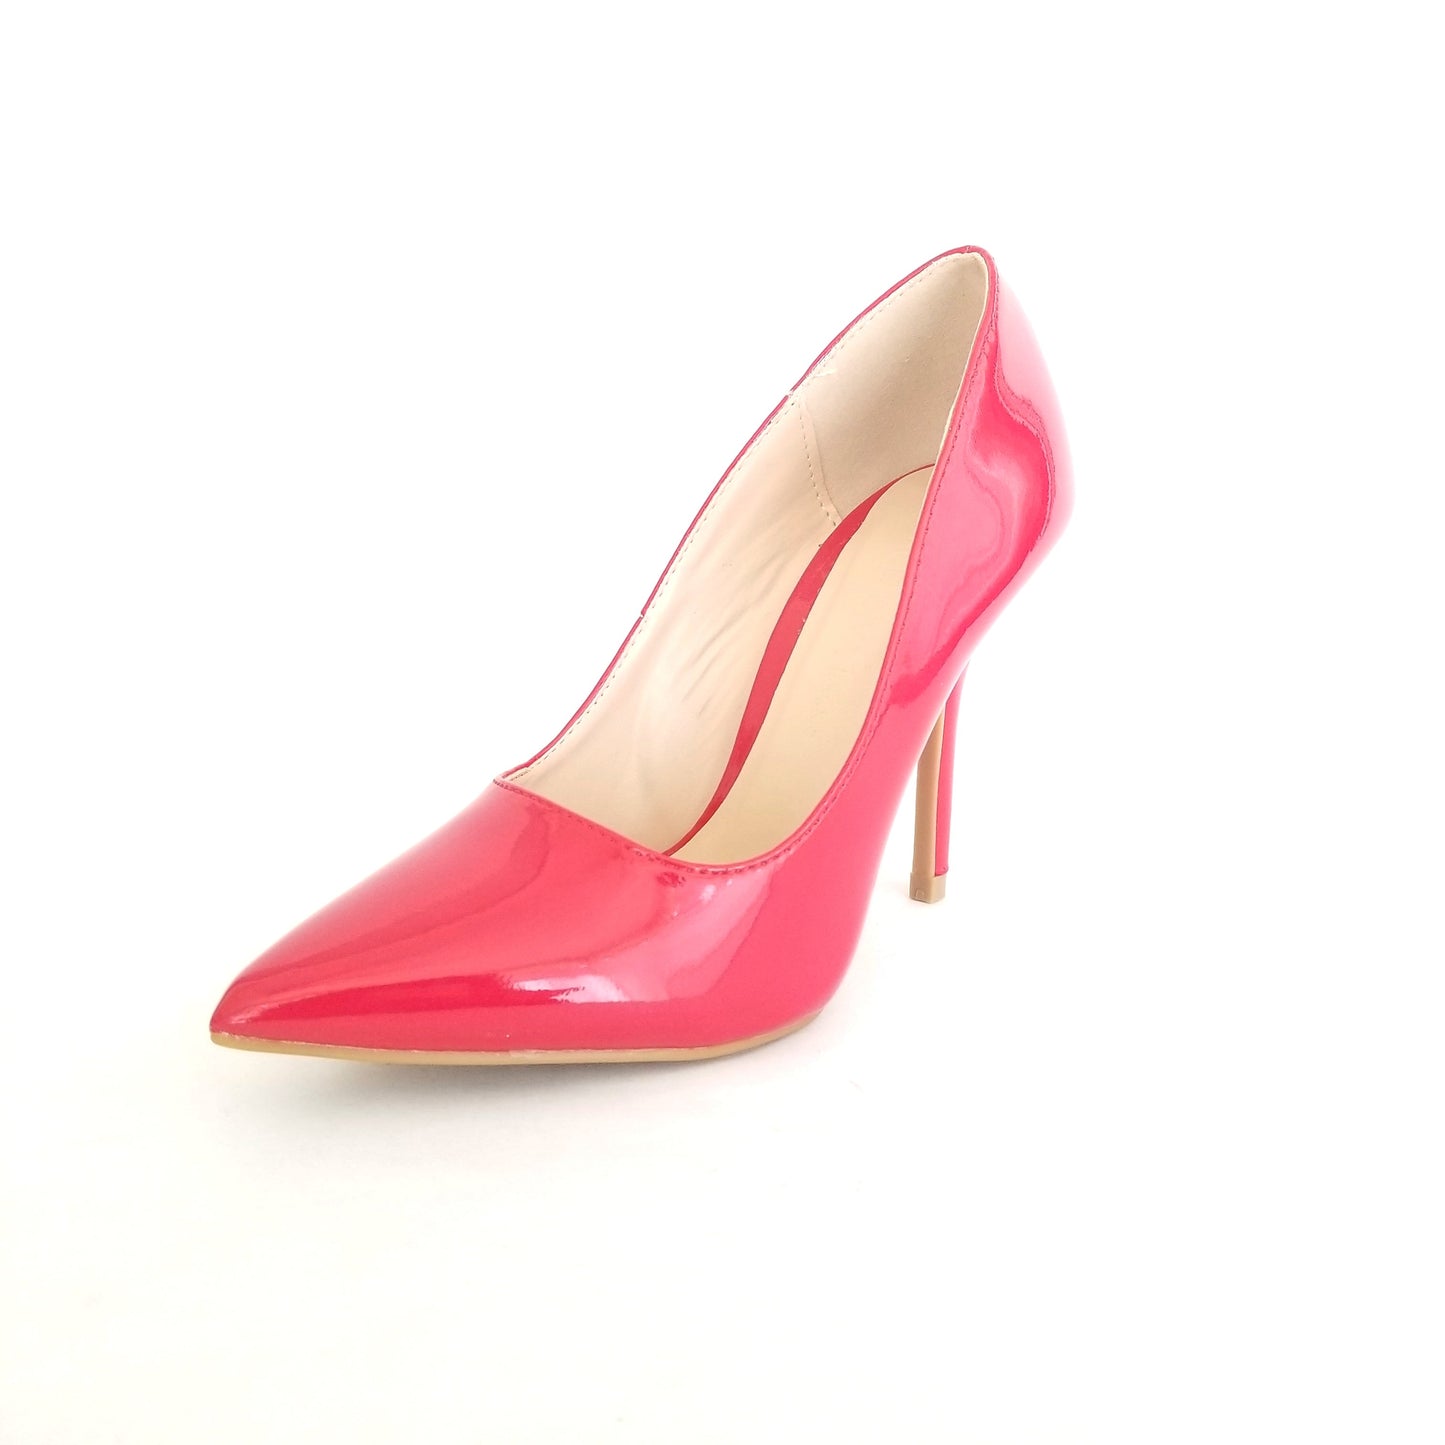 Lovisa Red Patent Leather Pointed Toe Pumps - Didi Royale